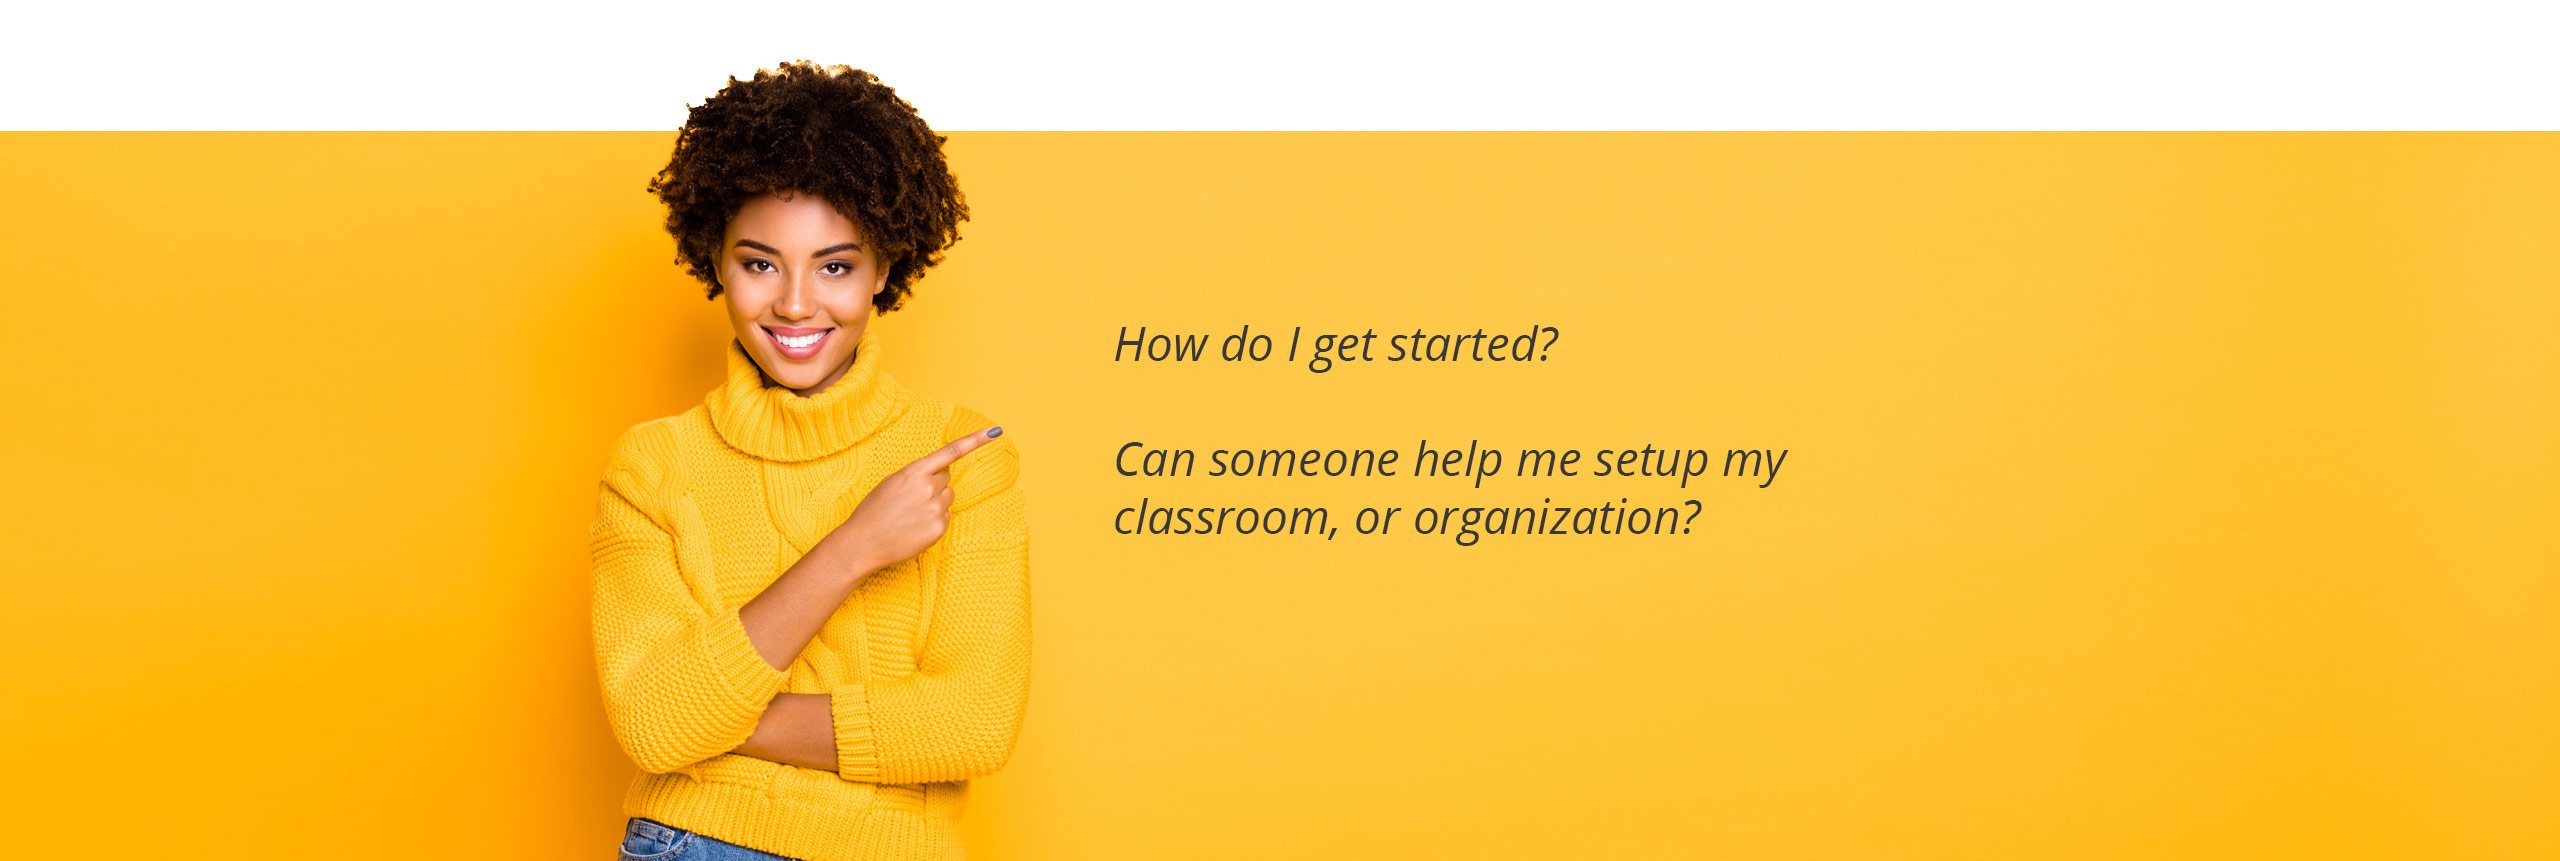 Contact us - Topico - Help with my classroom